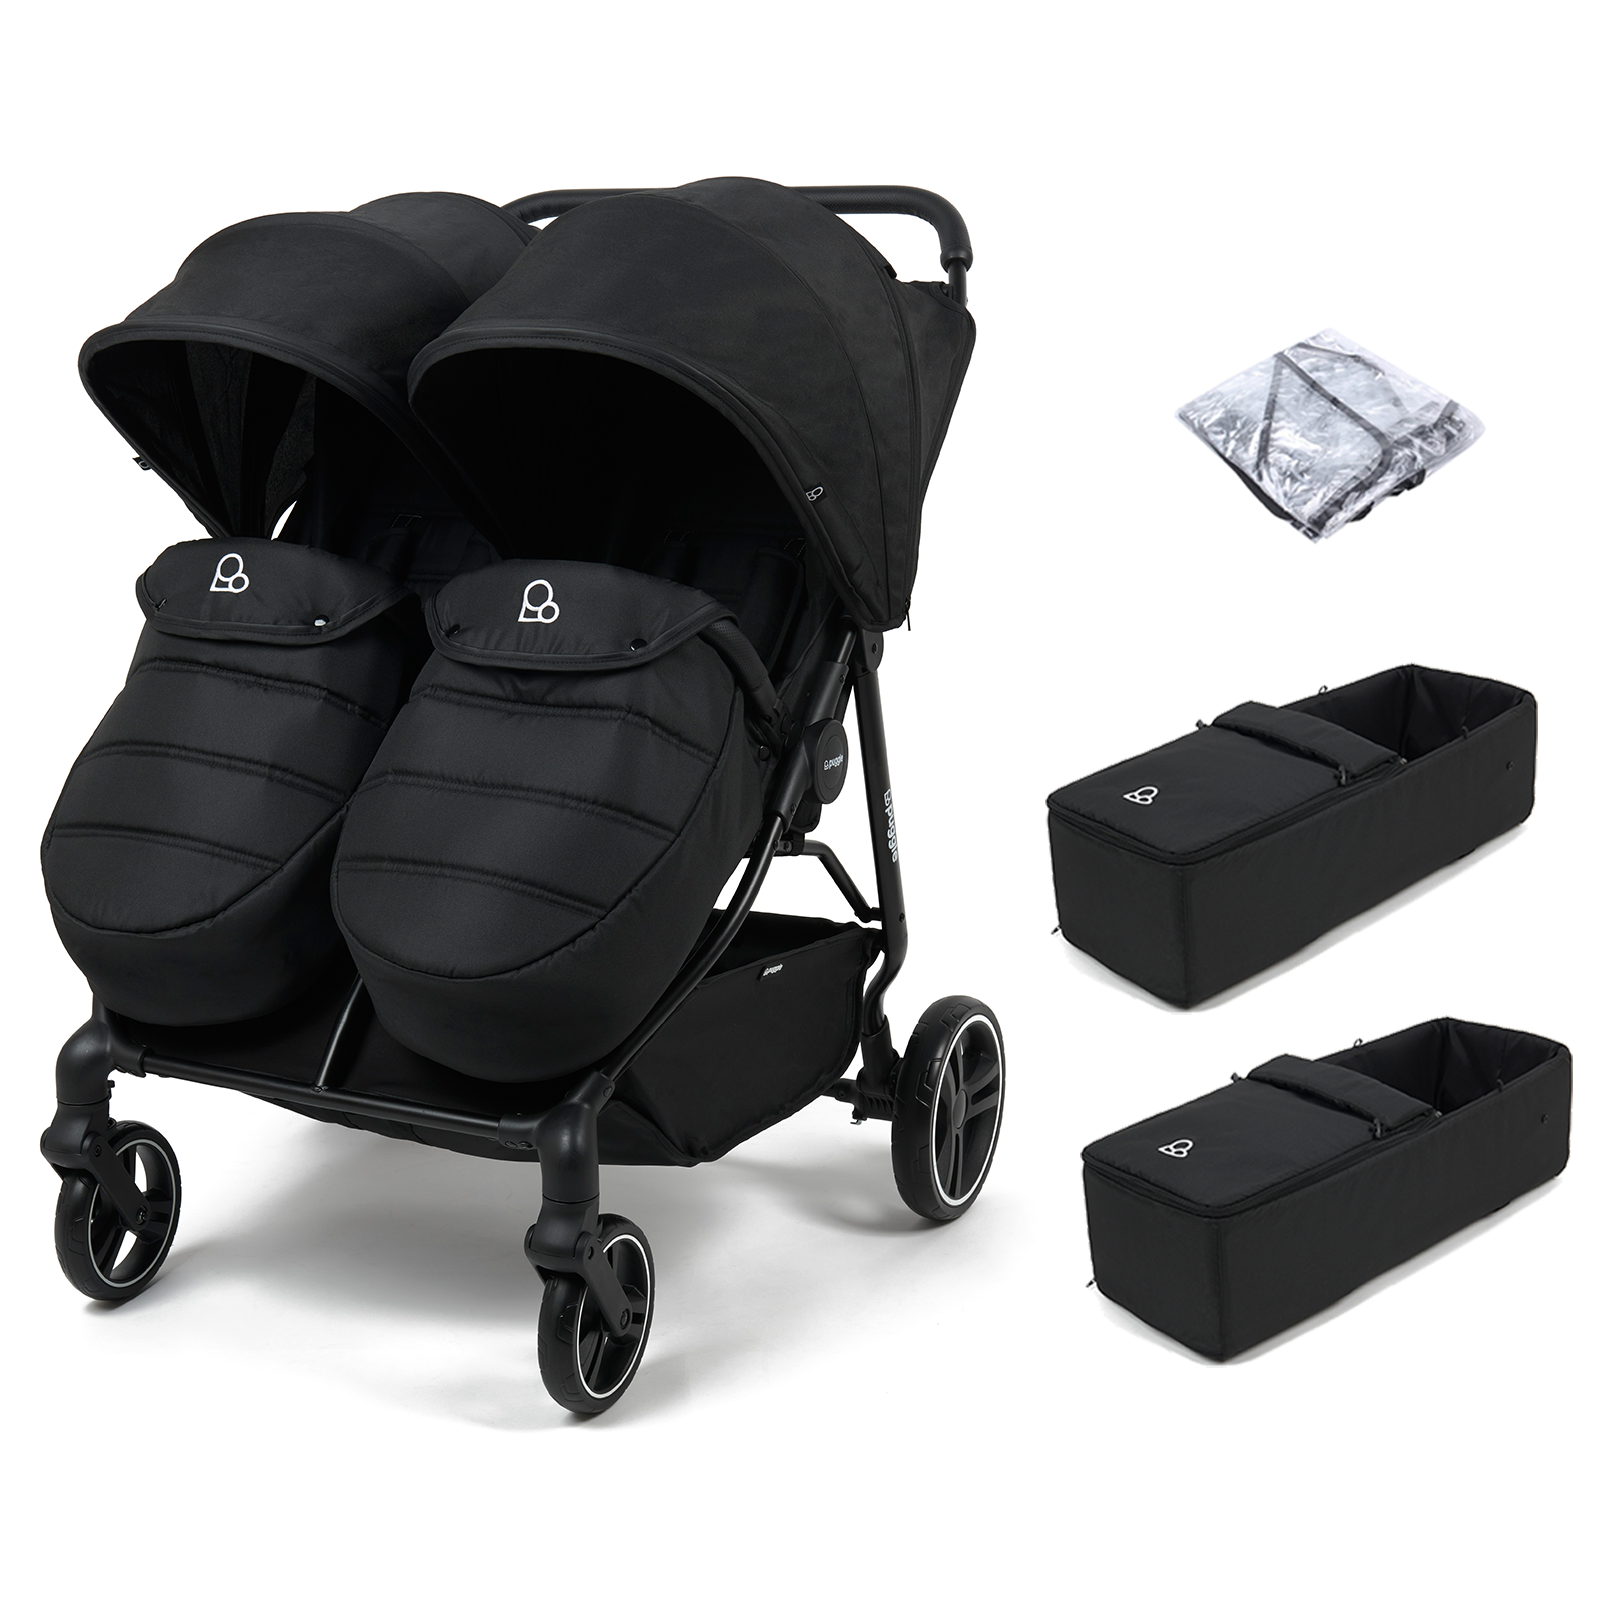 Puggle Urban City Easyfold Twin Double Pushchair + 2 Soft Carrycot - Storm Black